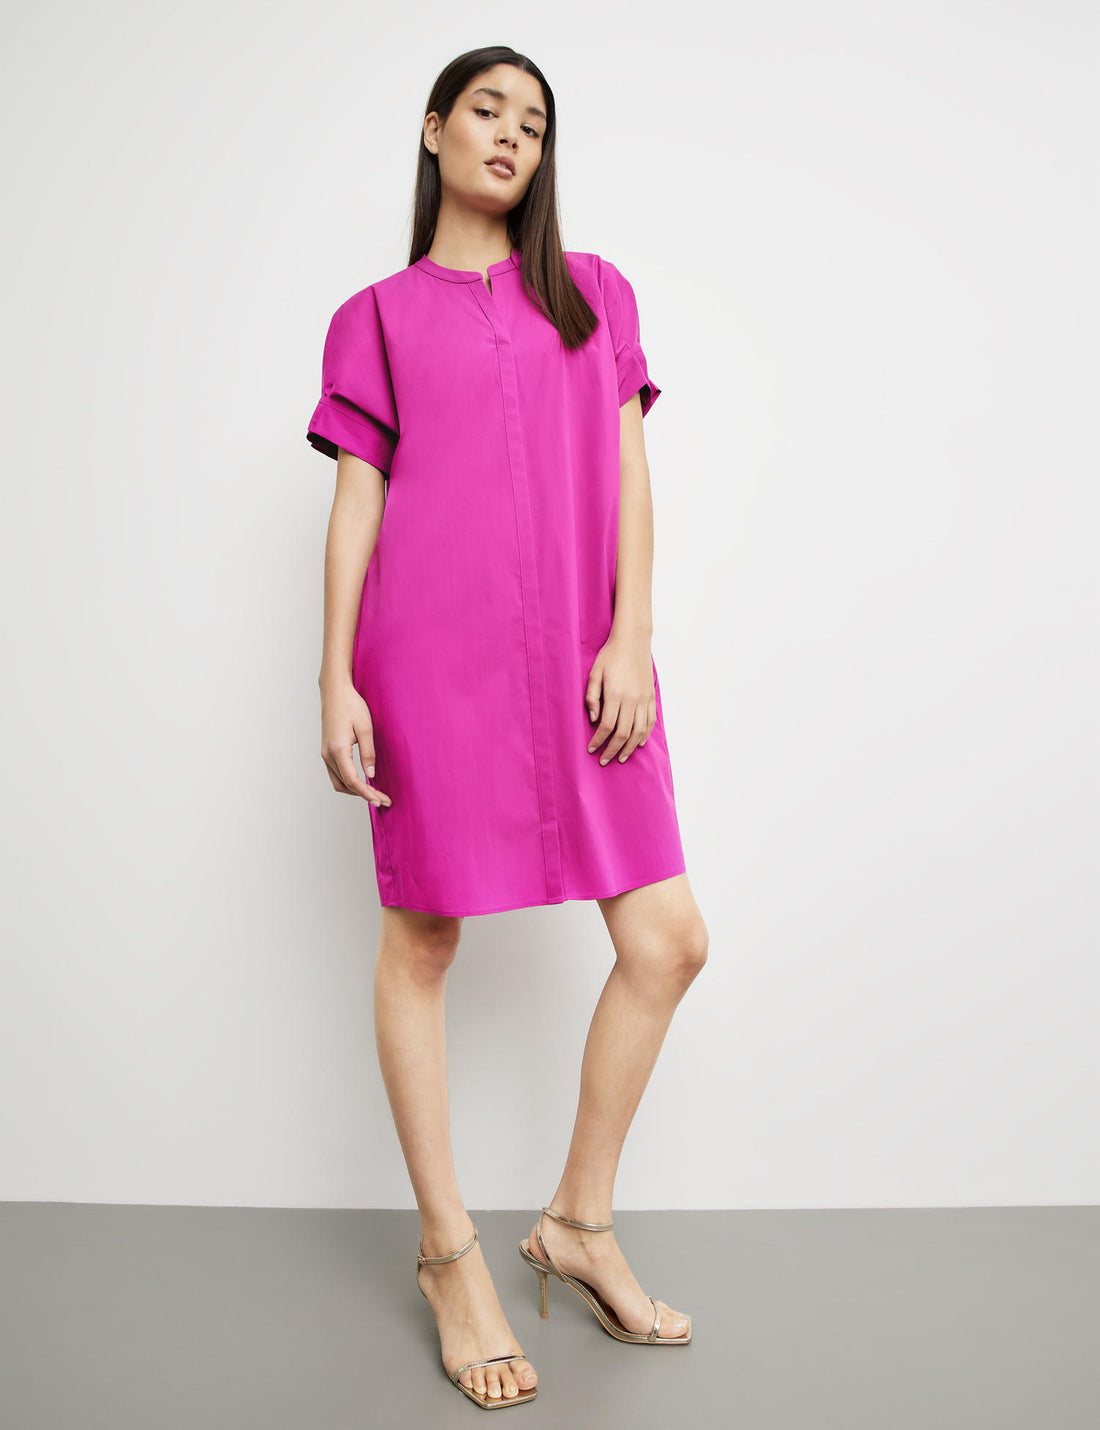 Tunic Dress In A Cotton Blend_580314-11014_3420_01